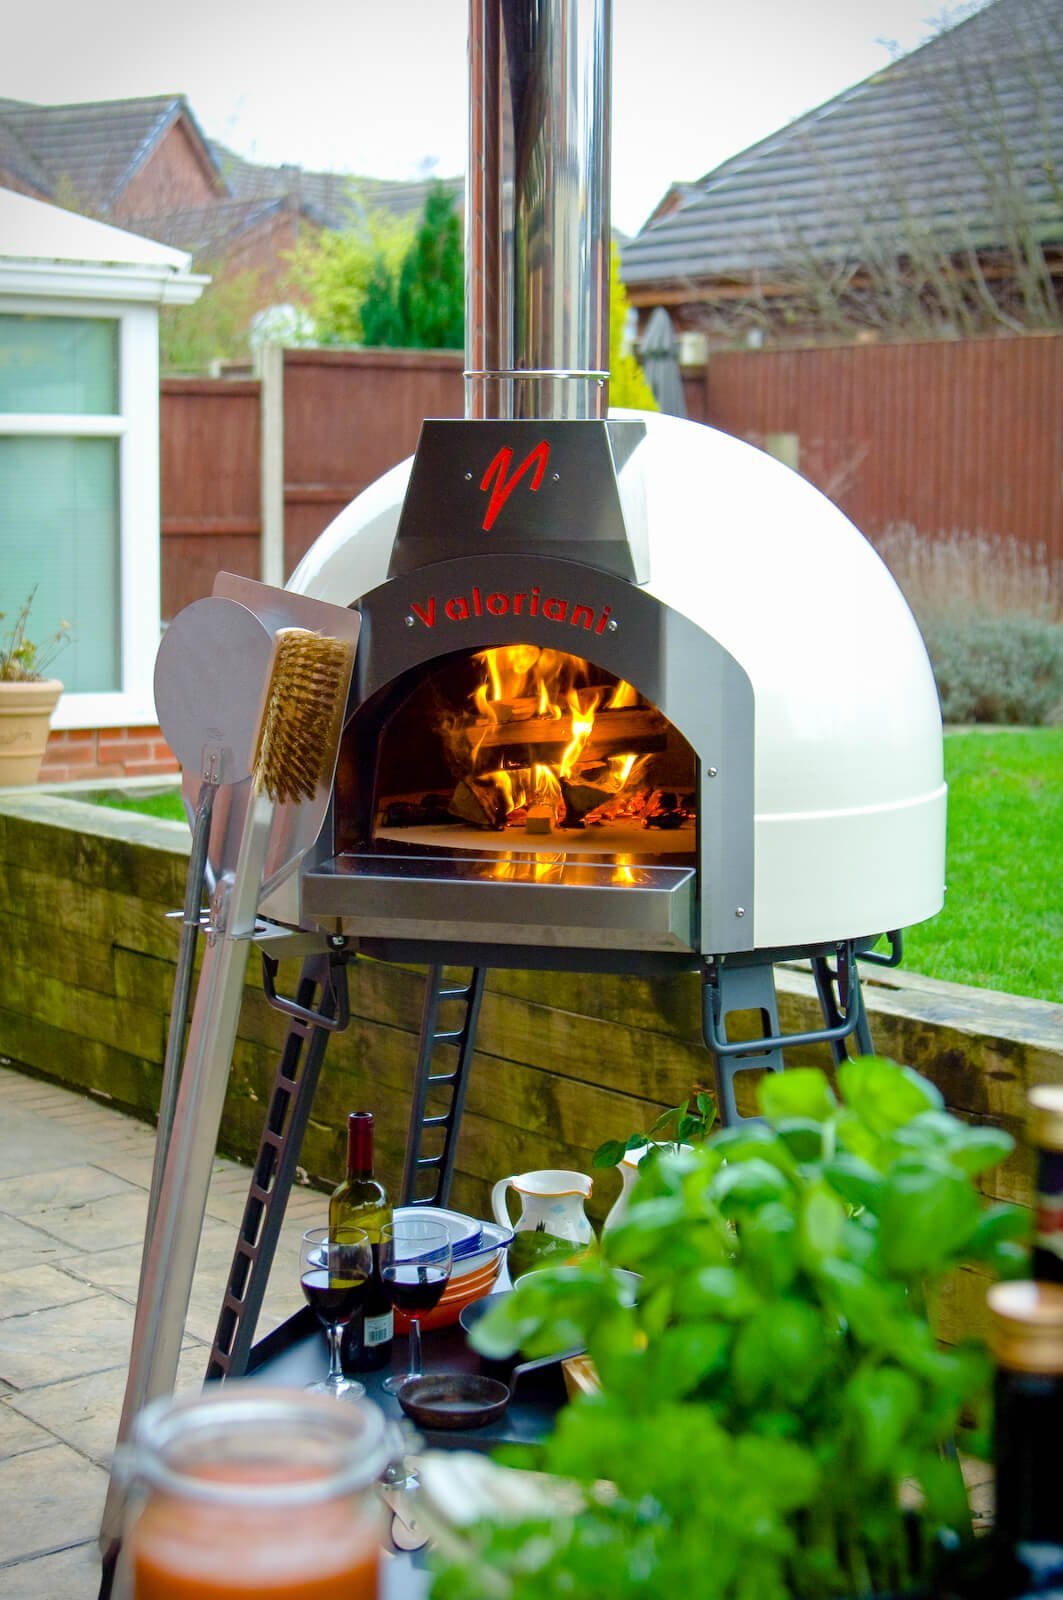 Valoriani Baby: pizza oven with gas firing and 60cm diameter, incl. 1. base, black